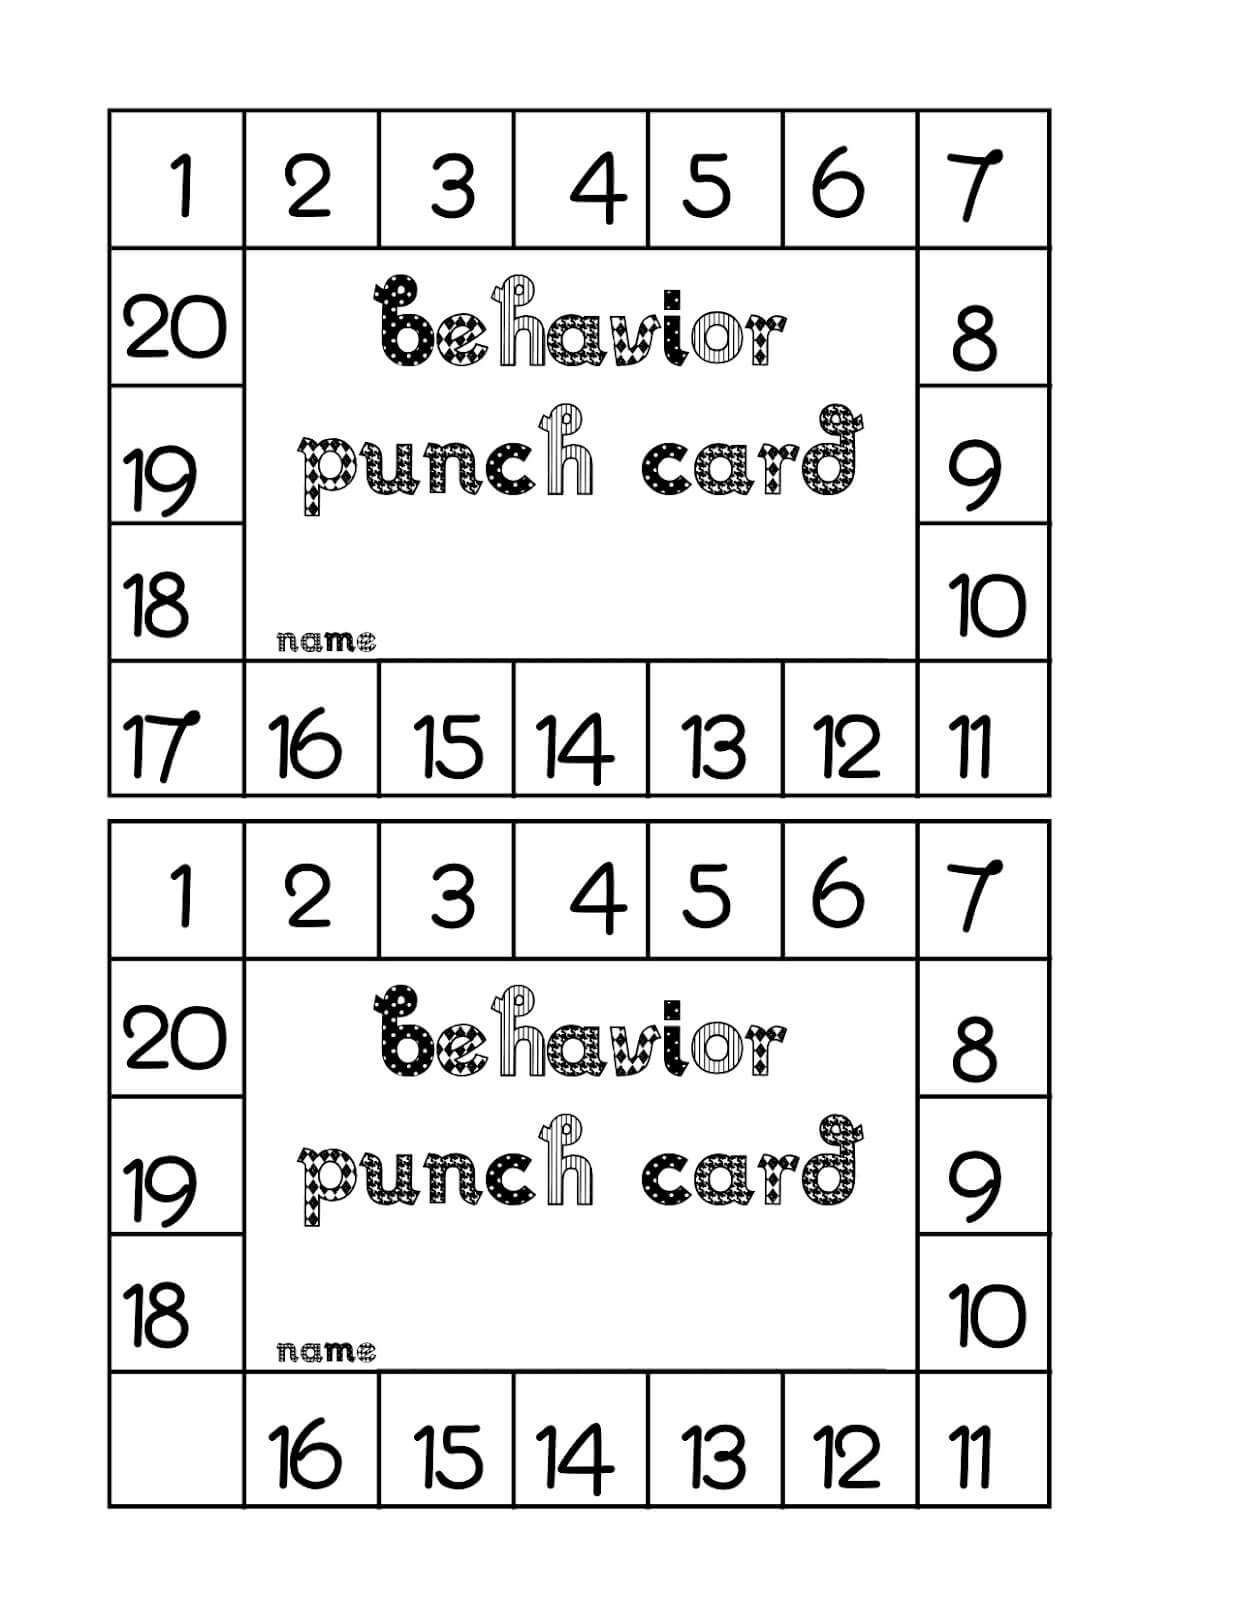 Punch Card Template Free ] – Free Printable Punch Card Within Free Printable Punch Card Template